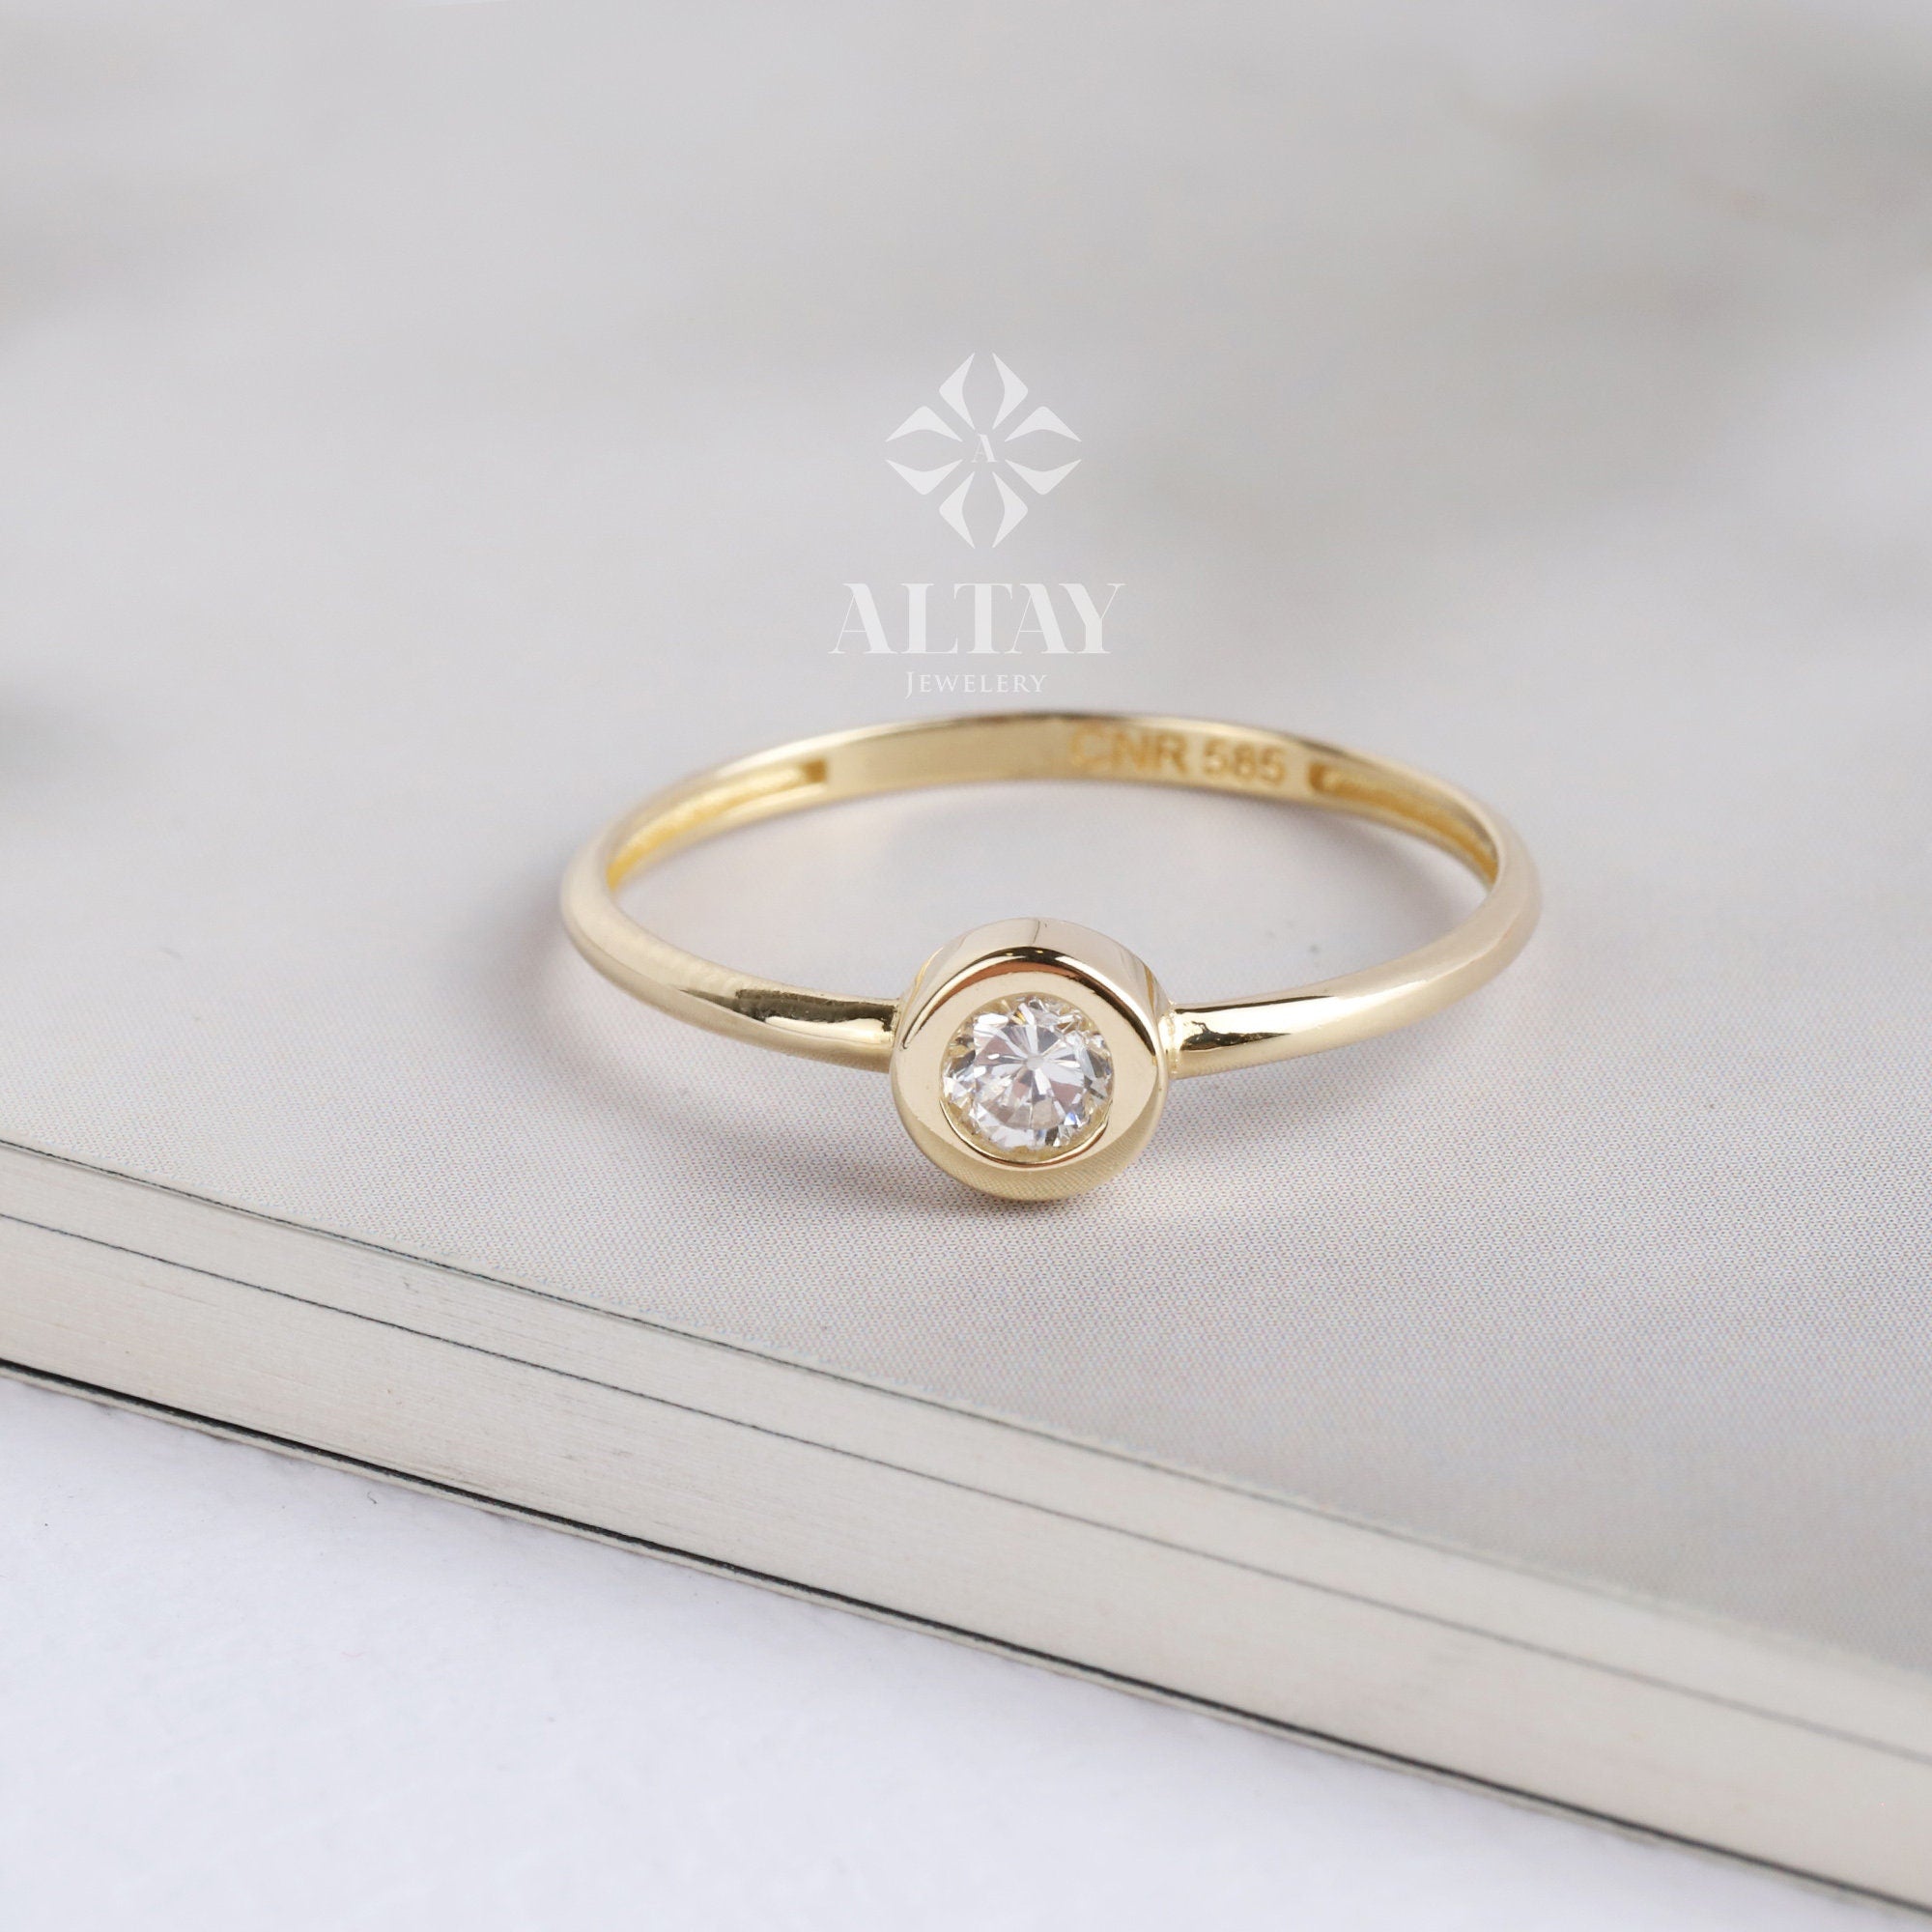 14K Solitaire Ring, CZ Diamond Bezel Ring, Stackable Band Ring, Dainty Promise Ring, CZ Diamond Engagement Band Ring, Round Bezel Set Ring